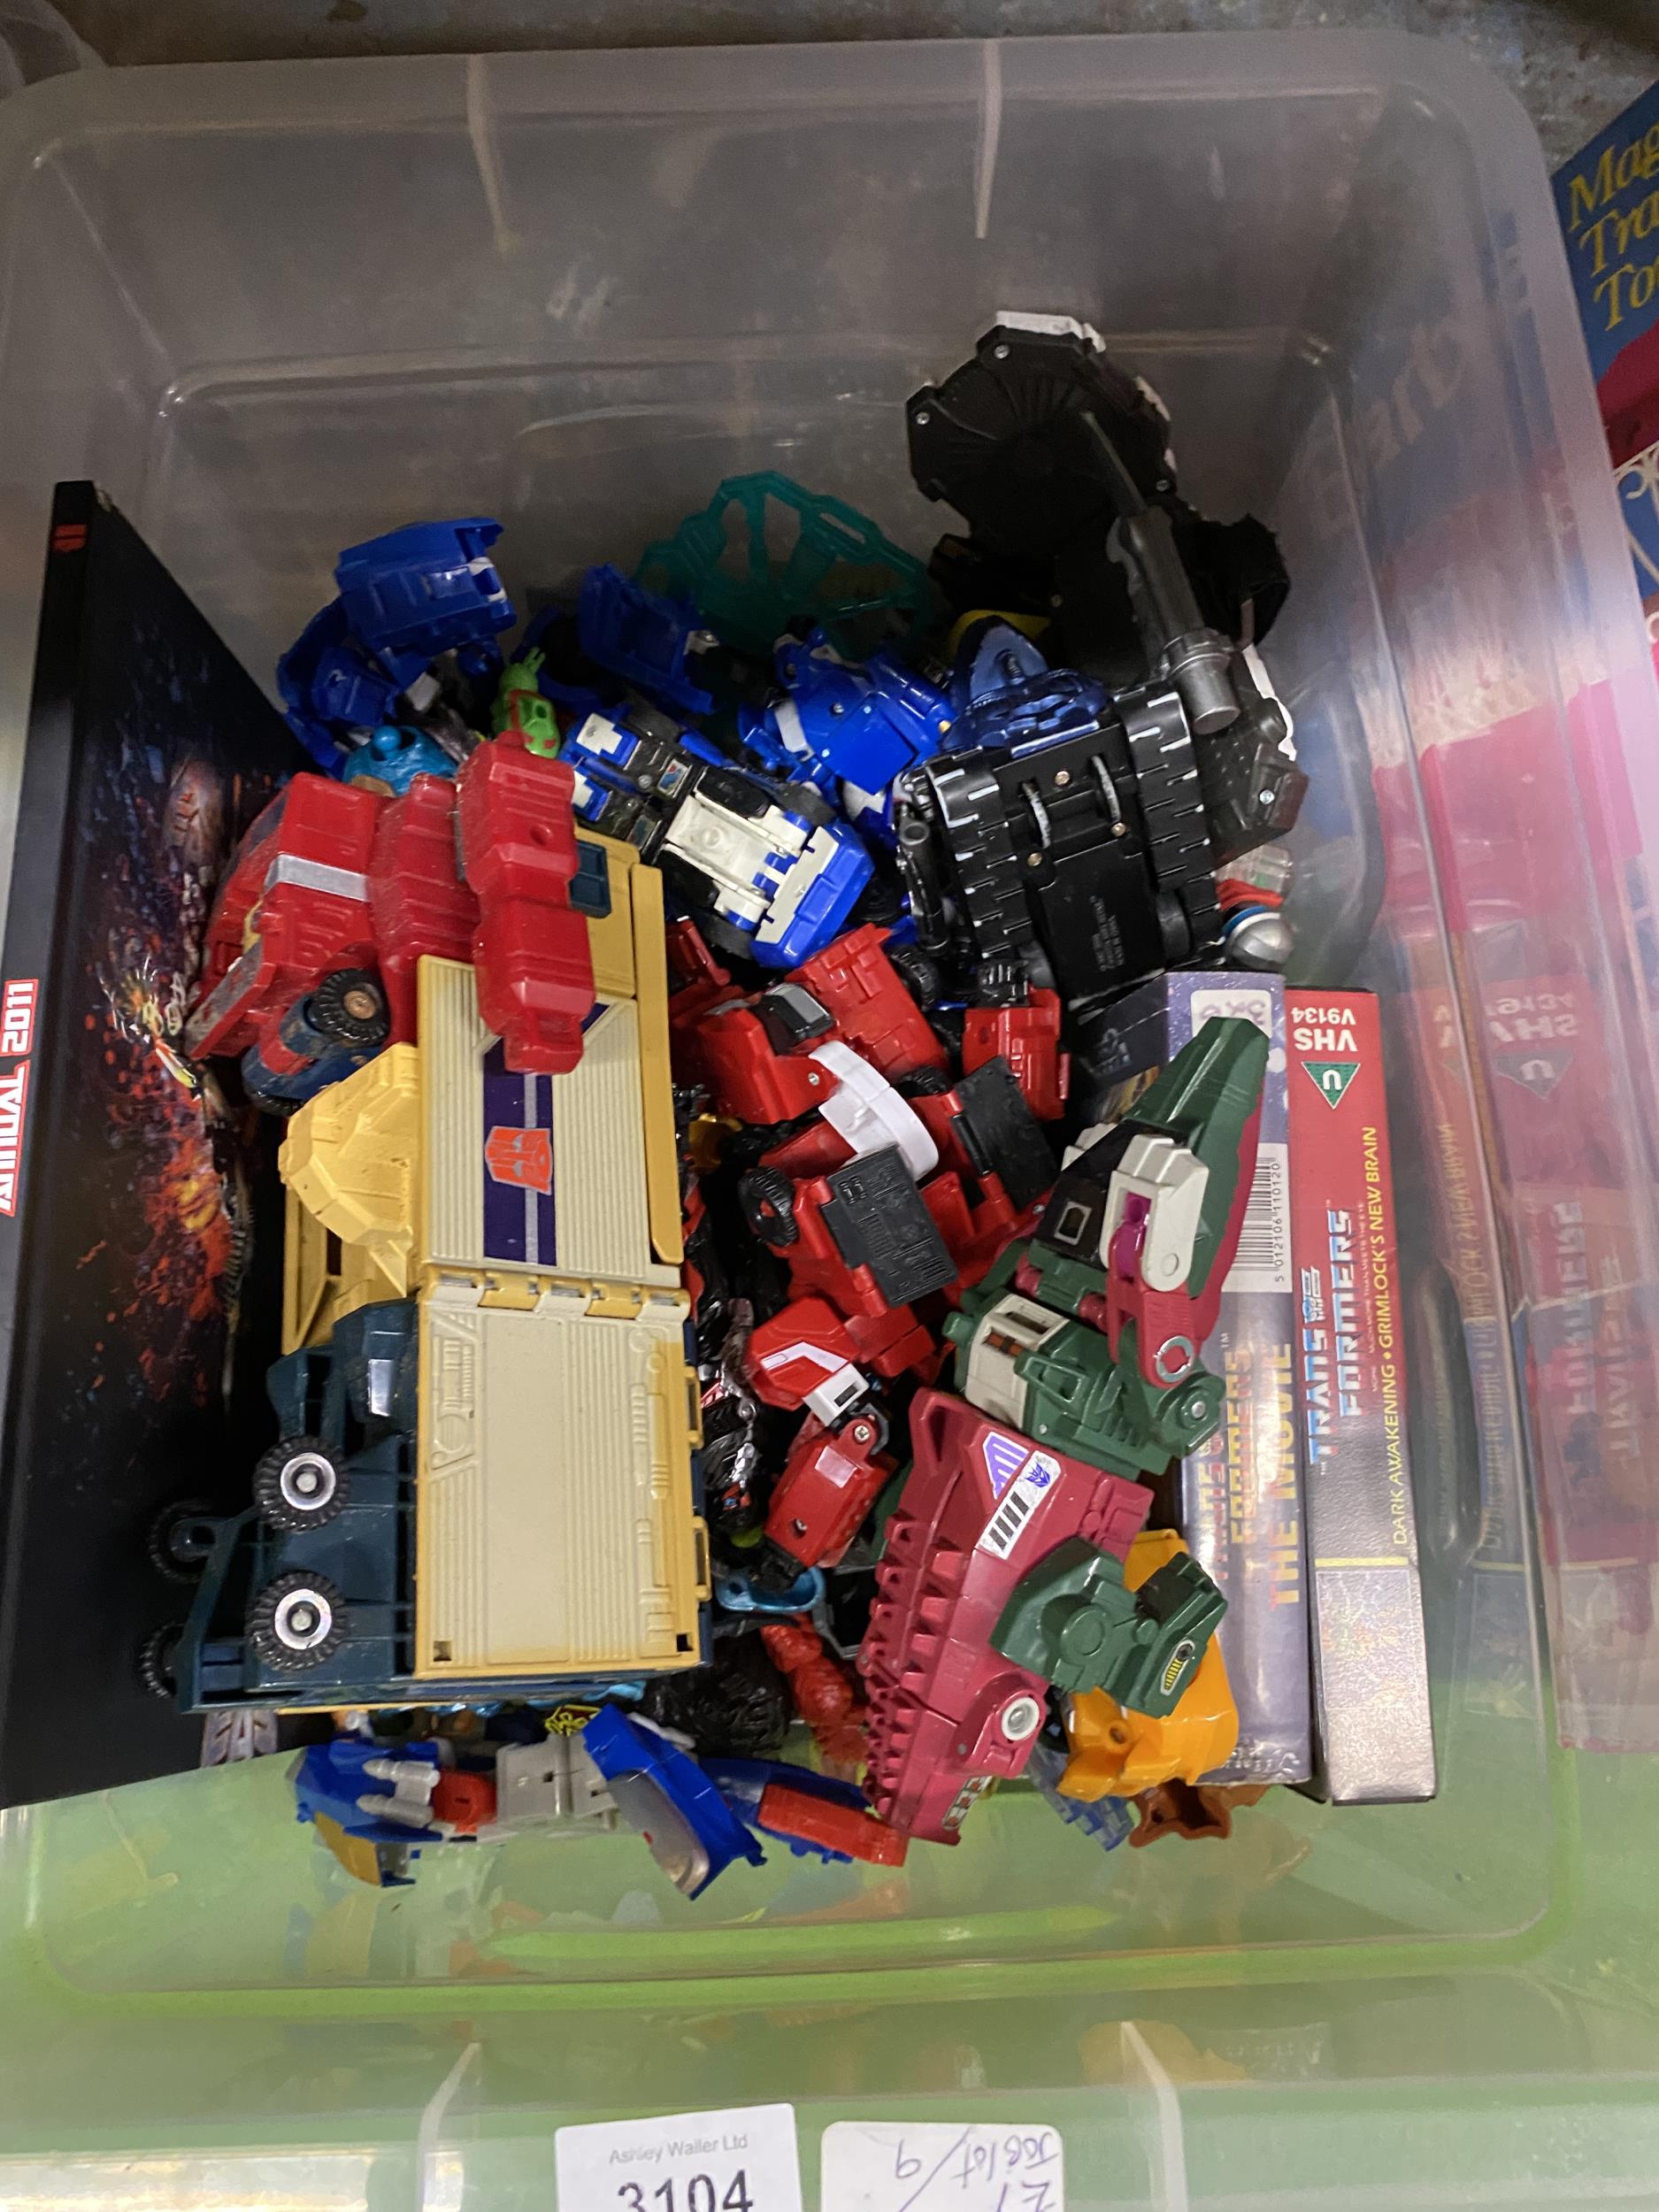 A MIXED BOX OF TRANSFORMERS MODELS WITH BOOKS, FIGURES ETC